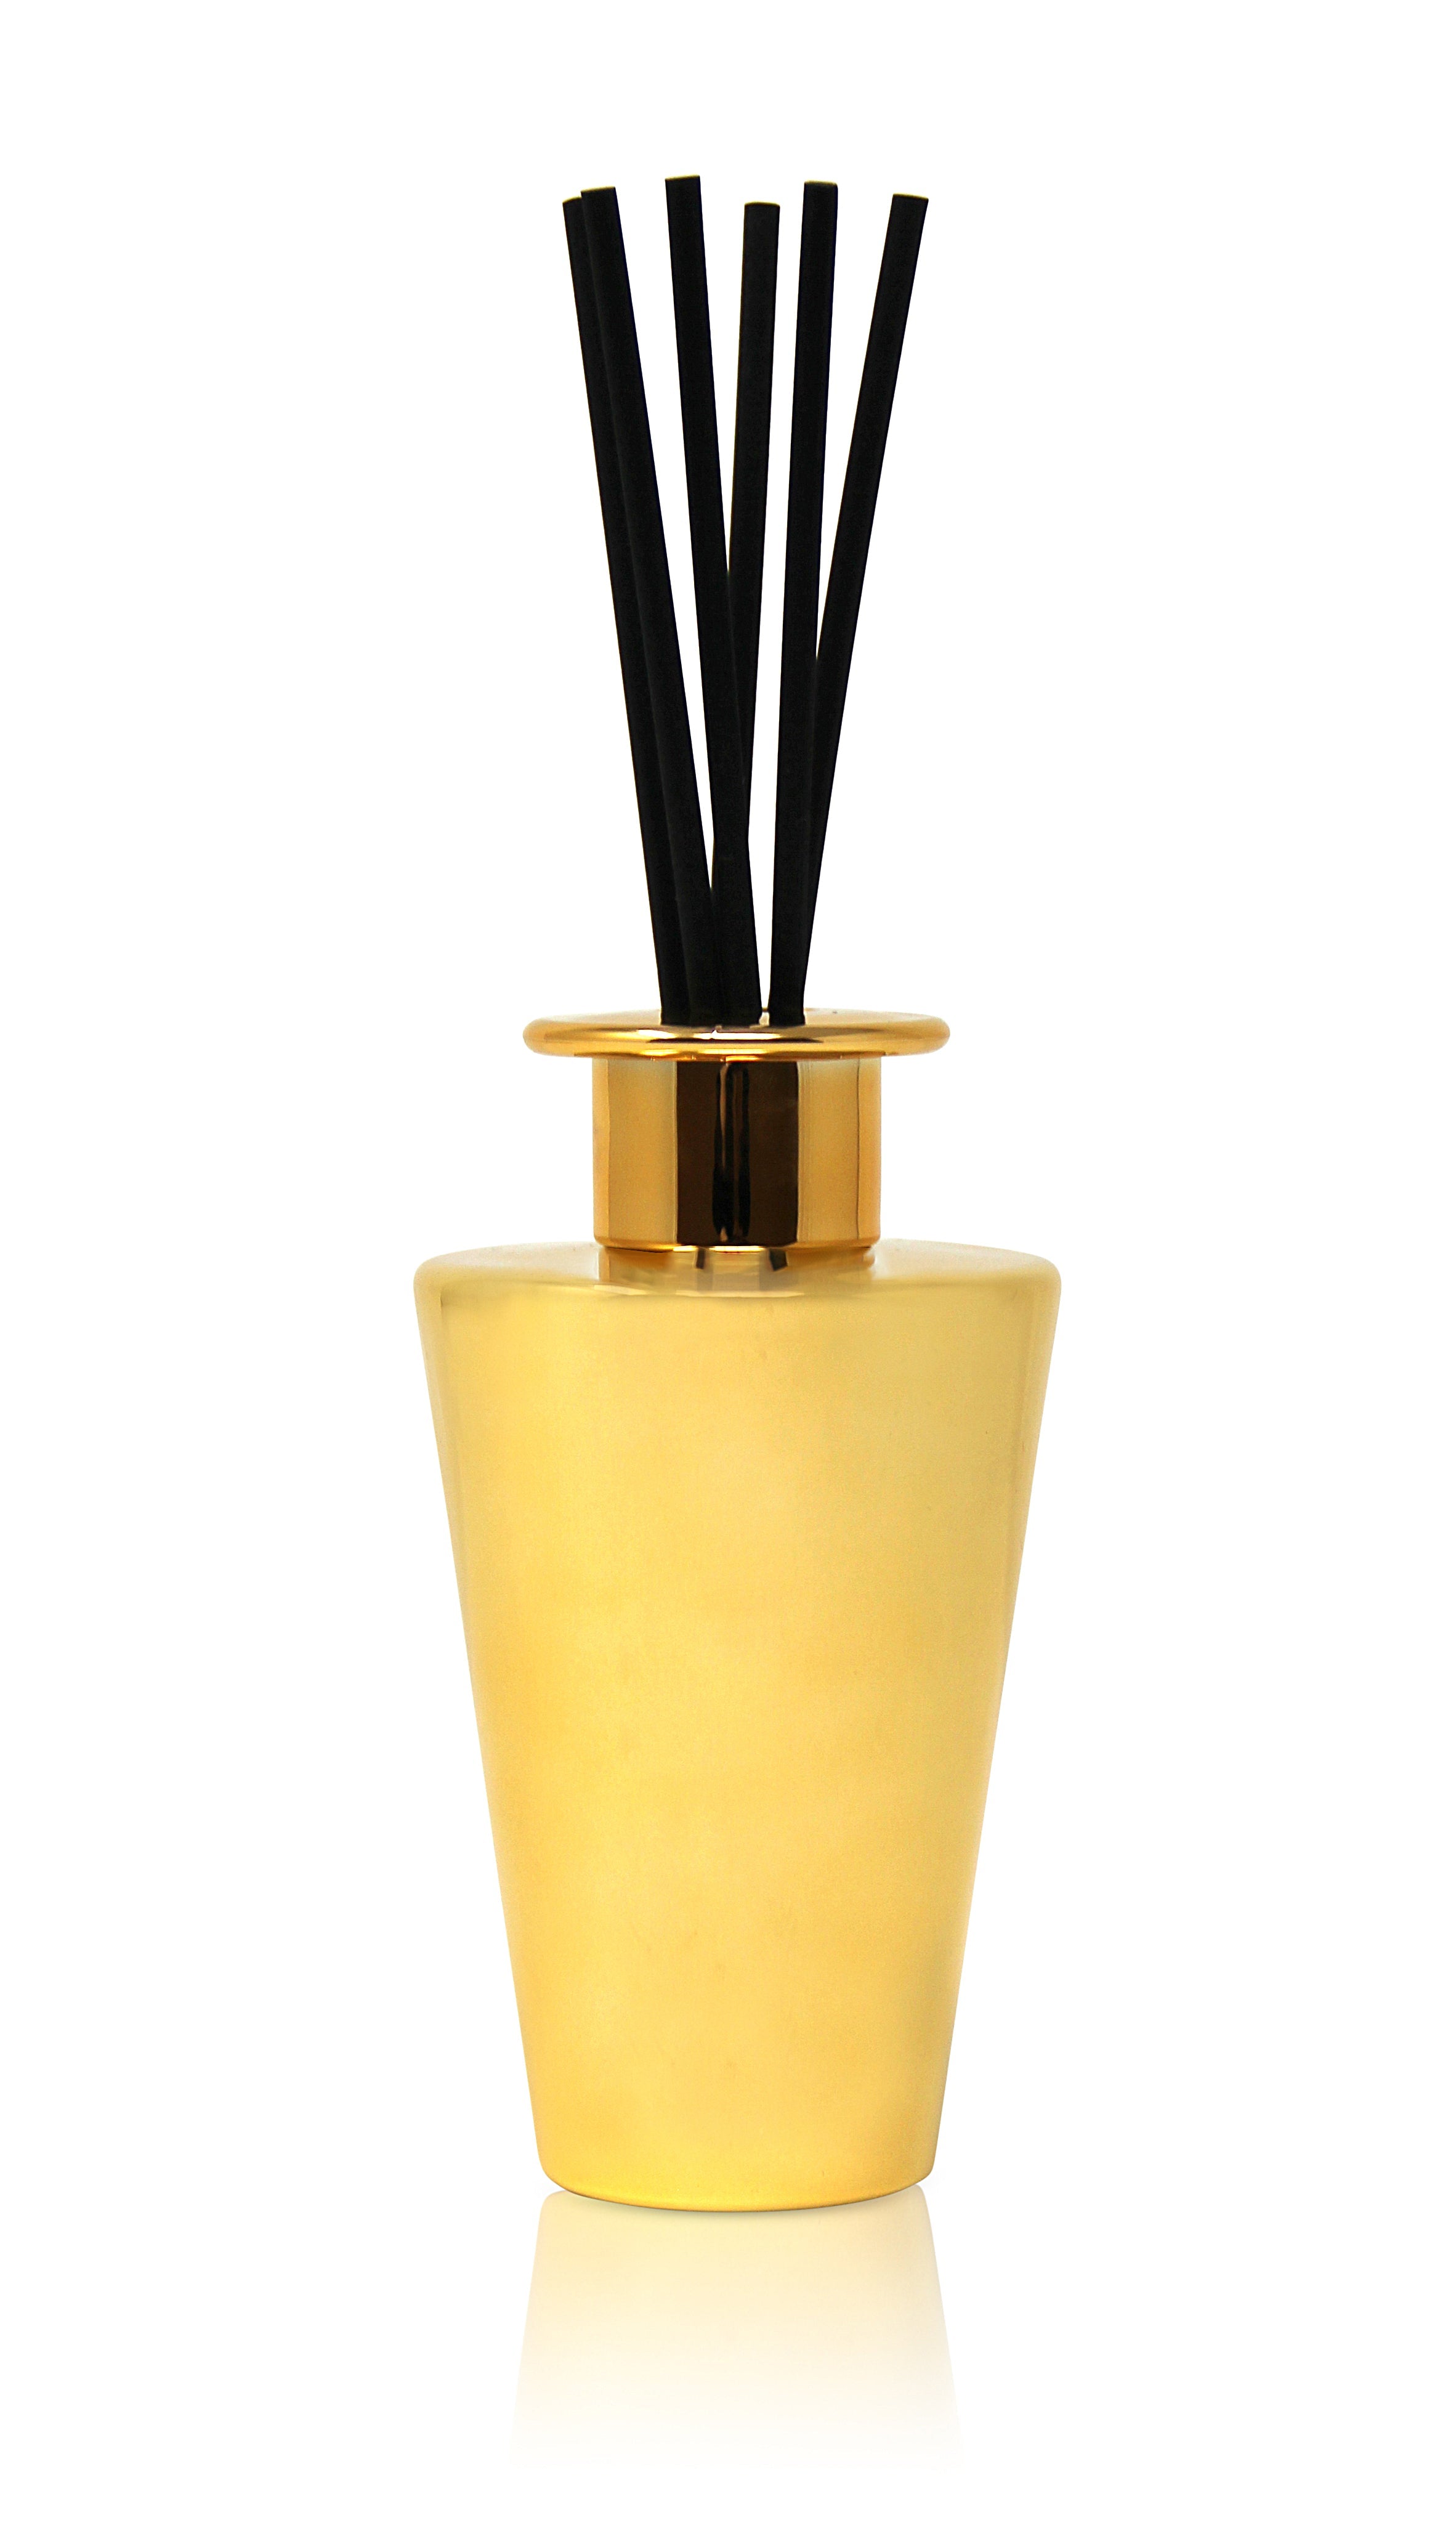 VIVIENCE Polished Gold Reed Diffuser, "Zen Tea" Scent